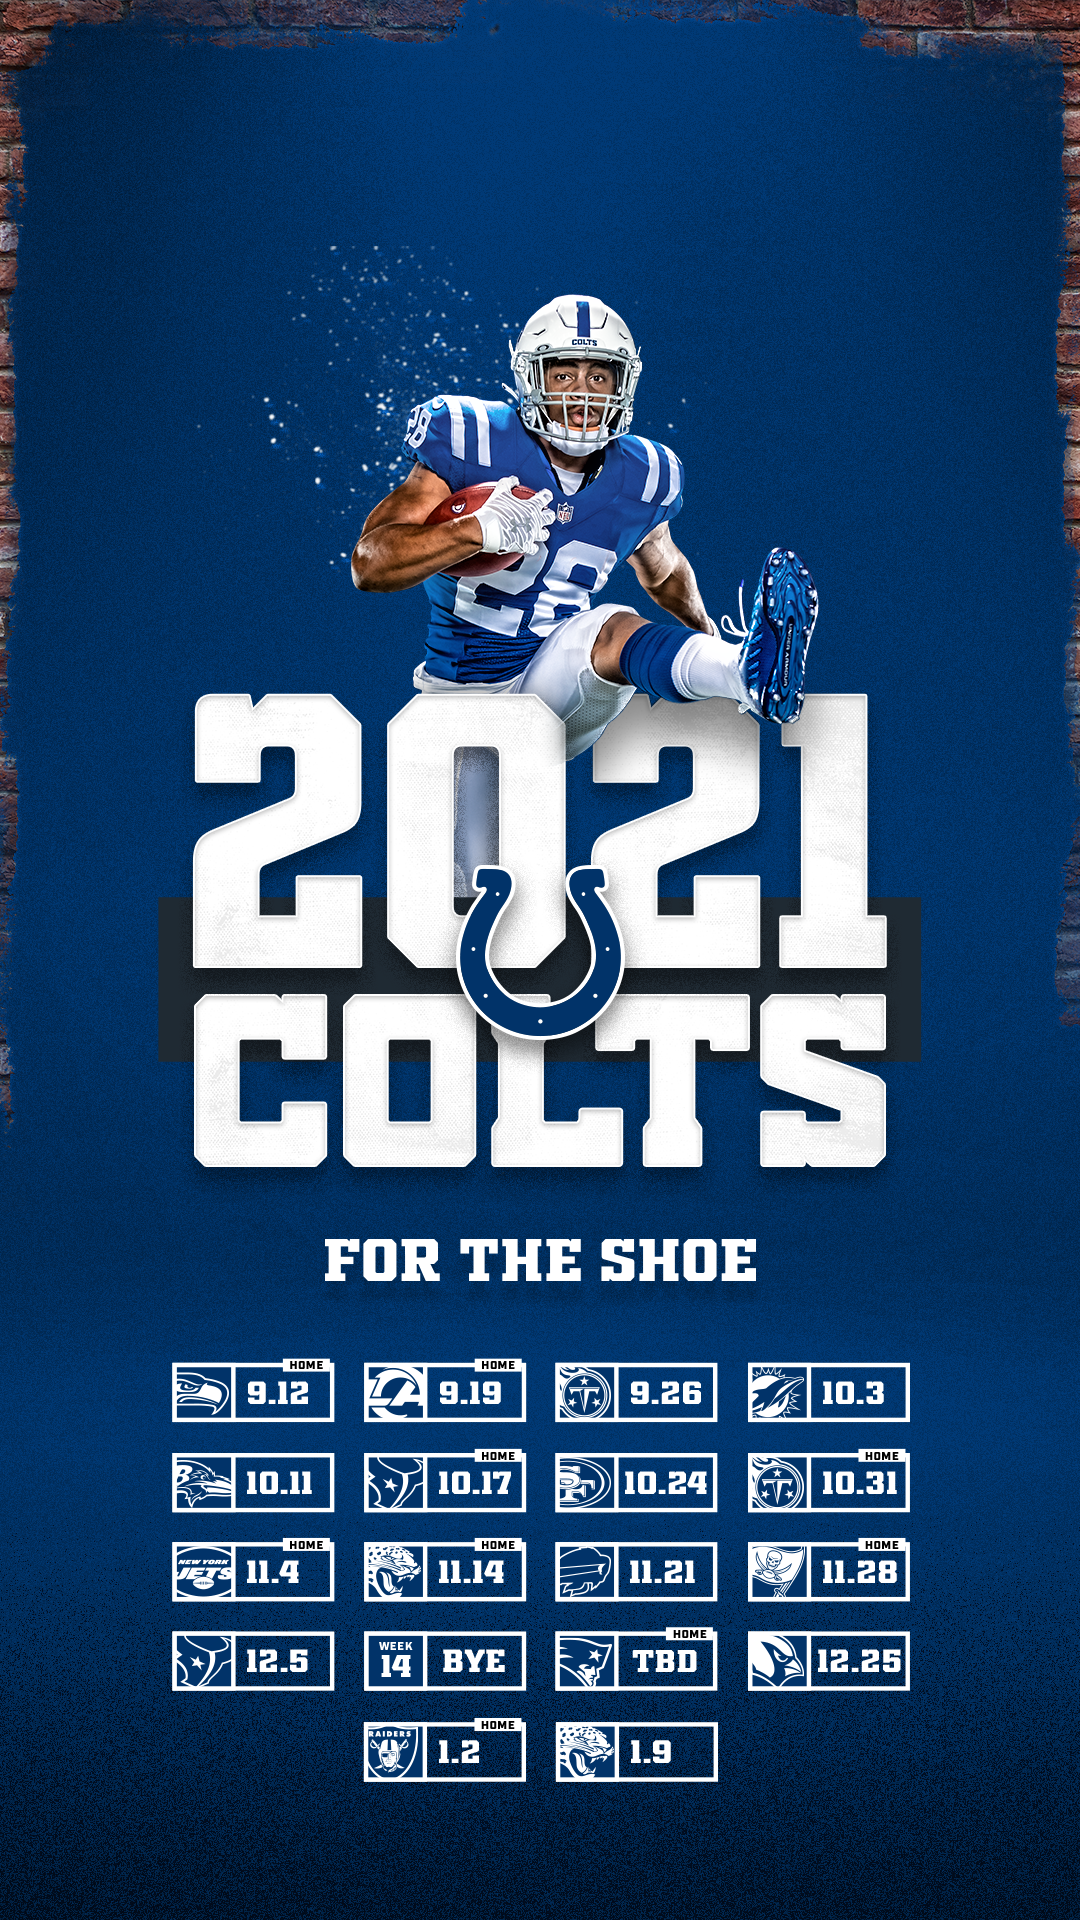 Indianapolis Colts 2022 Schedule Colts Schedule | Indianapolis Colts - Colts.com